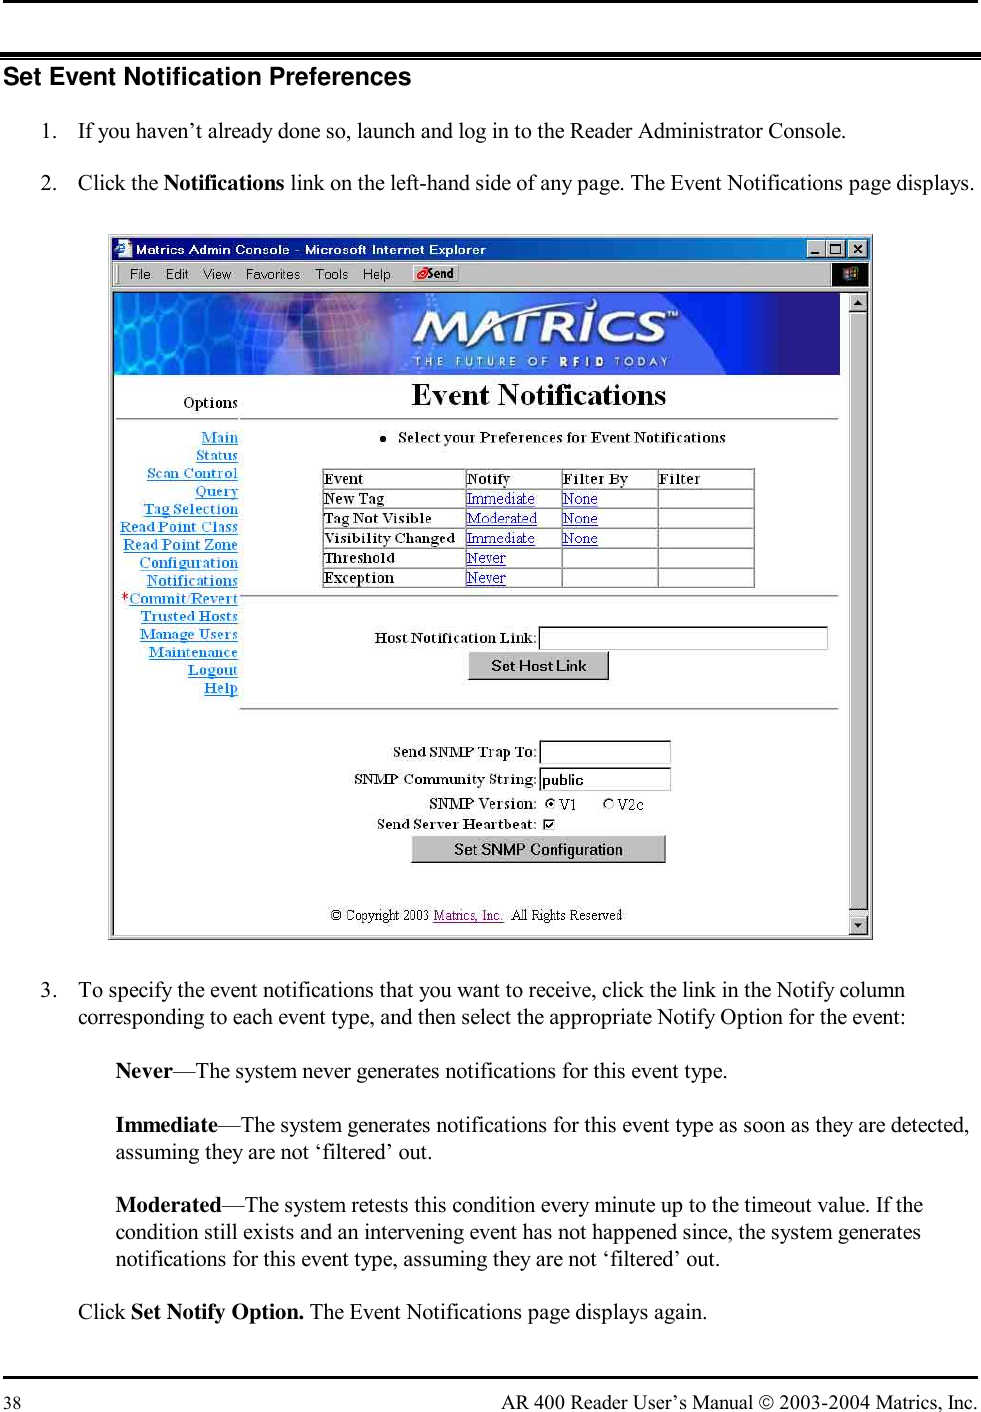  38  AR 400 Reader User’s Manual  2003-2004 Matrics, Inc. Set Event Notification Preferences 1.  If you haven’t already done so, launch and log in to the Reader Administrator Console. 2. Click the Notifications link on the left-hand side of any page. The Event Notifications page displays.  3.  To specify the event notifications that you want to receive, click the link in the Notify column corresponding to each event type, and then select the appropriate Notify Option for the event:   Never—The system never generates notifications for this event type.   Immediate—The system generates notifications for this event type as soon as they are detected, assuming they are not ‘filtered’ out.   Moderated—The system retests this condition every minute up to the timeout value. If the condition still exists and an intervening event has not happened since, the system generates notifications for this event type, assuming they are not ‘filtered’ out. Click Set Notify Option. The Event Notifications page displays again. 